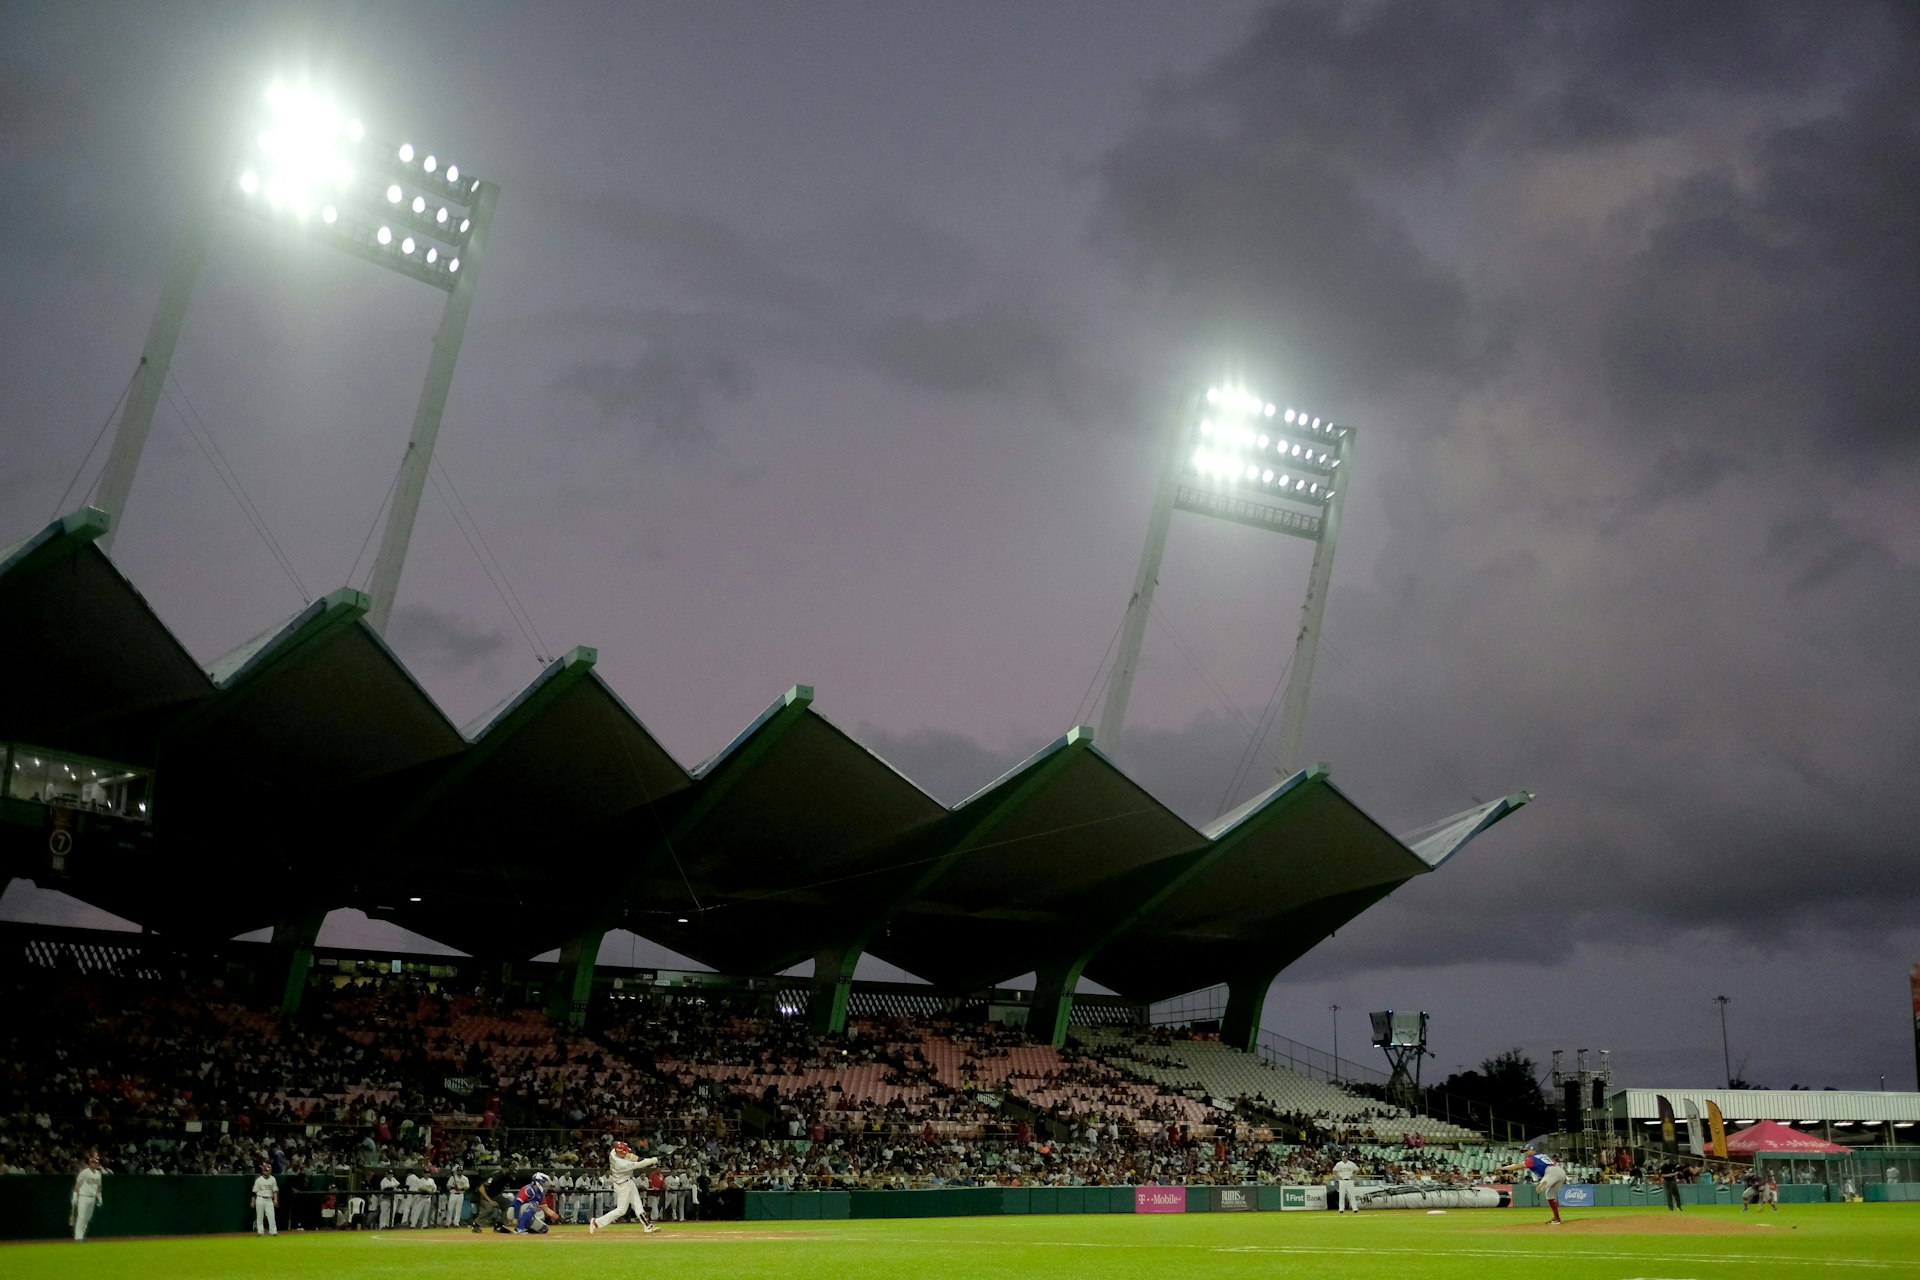 General view of the Hiram Bithorn stadium during the Caribbean Series baseball tournament game between Puerto Rico and Mexico in San Juan